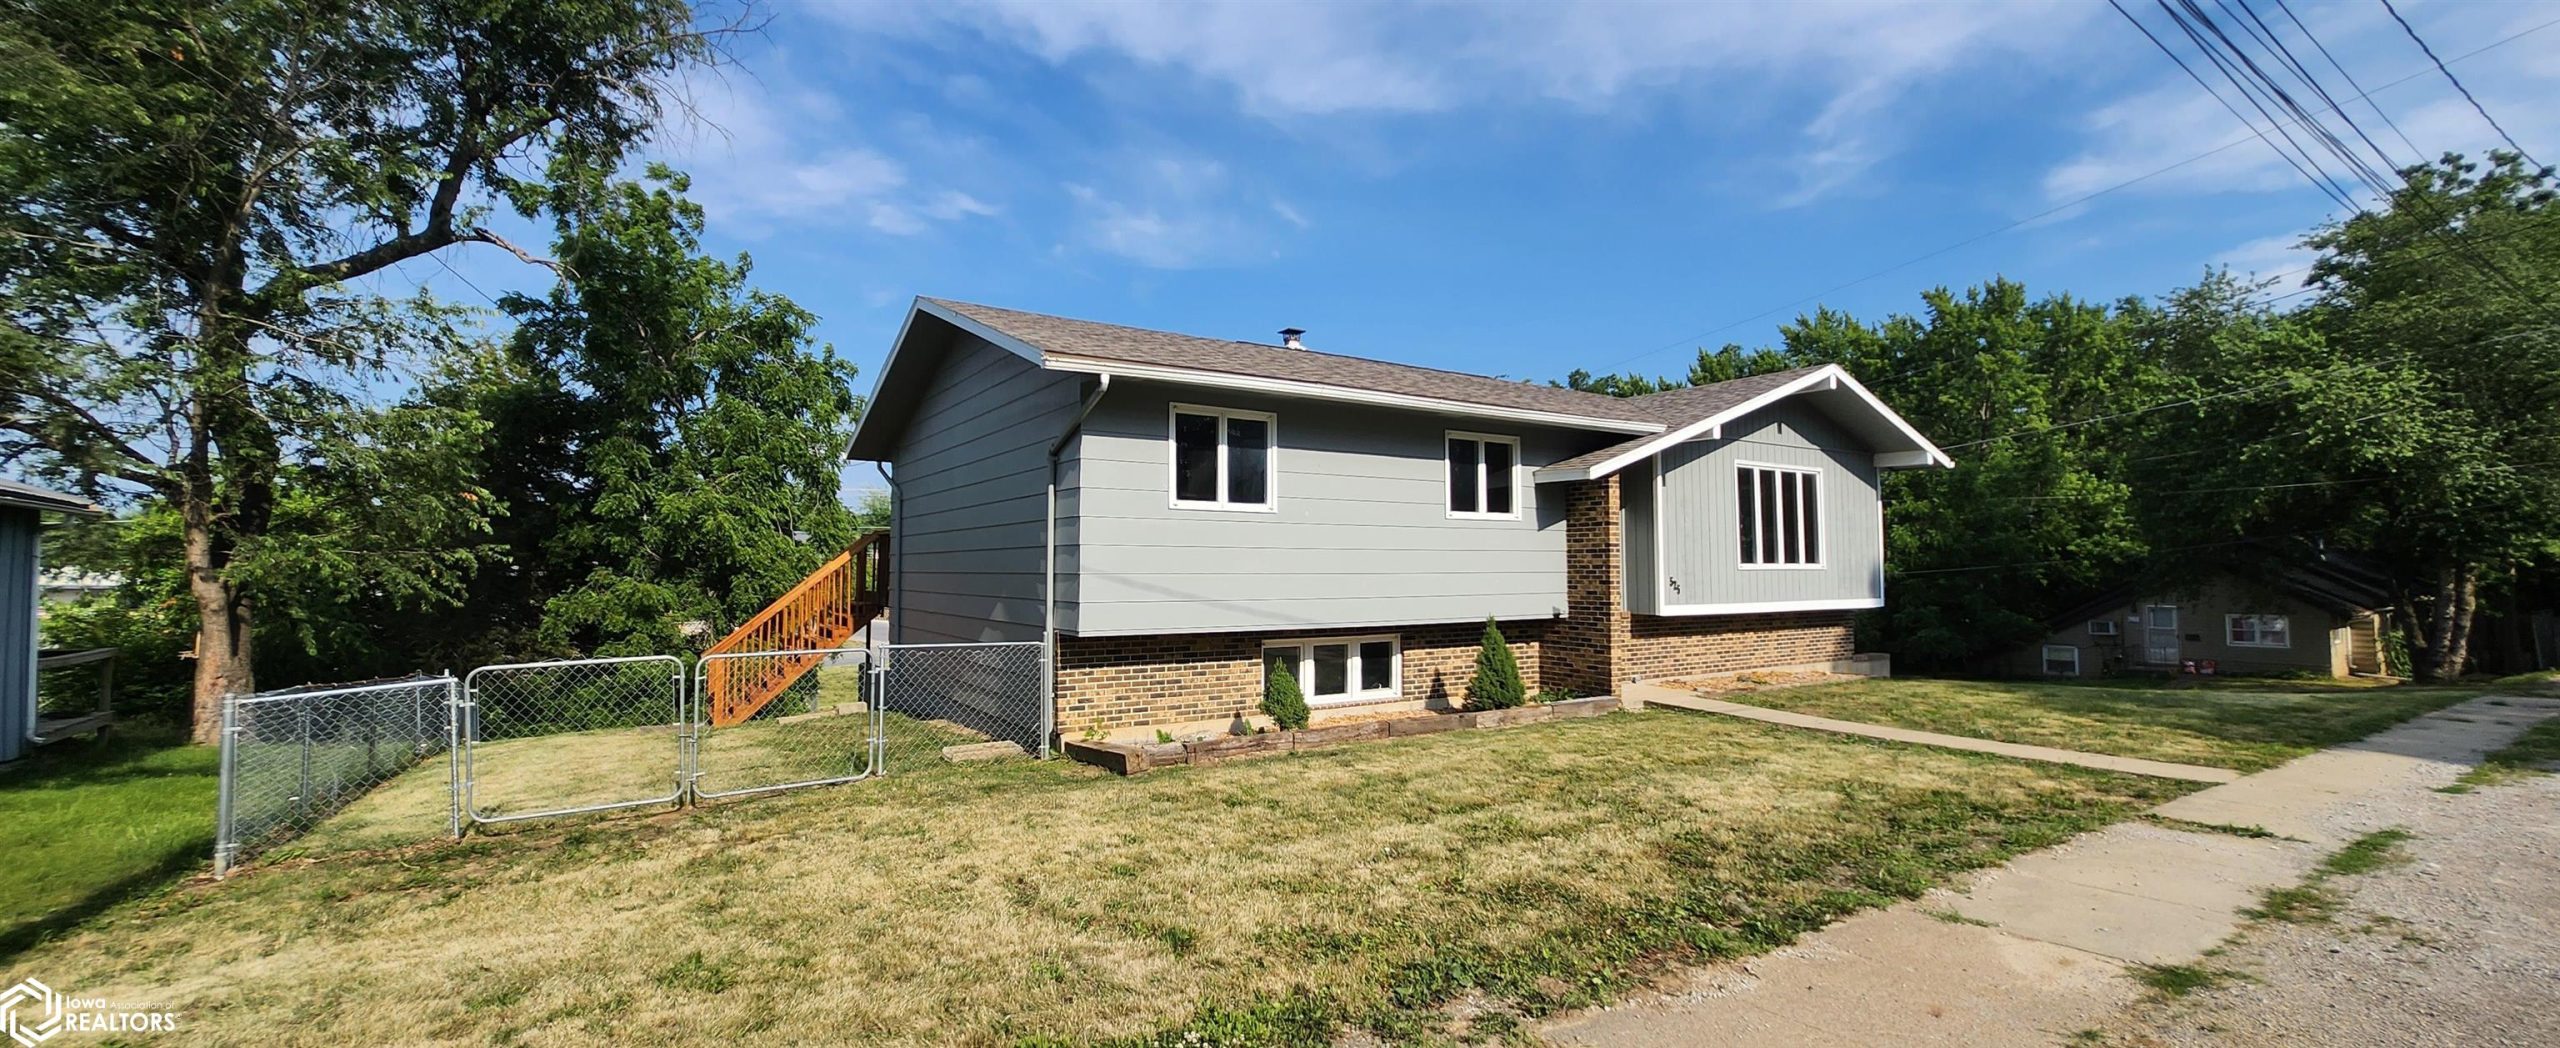 Listing 525 N 17Th Street Centerville IA 52544